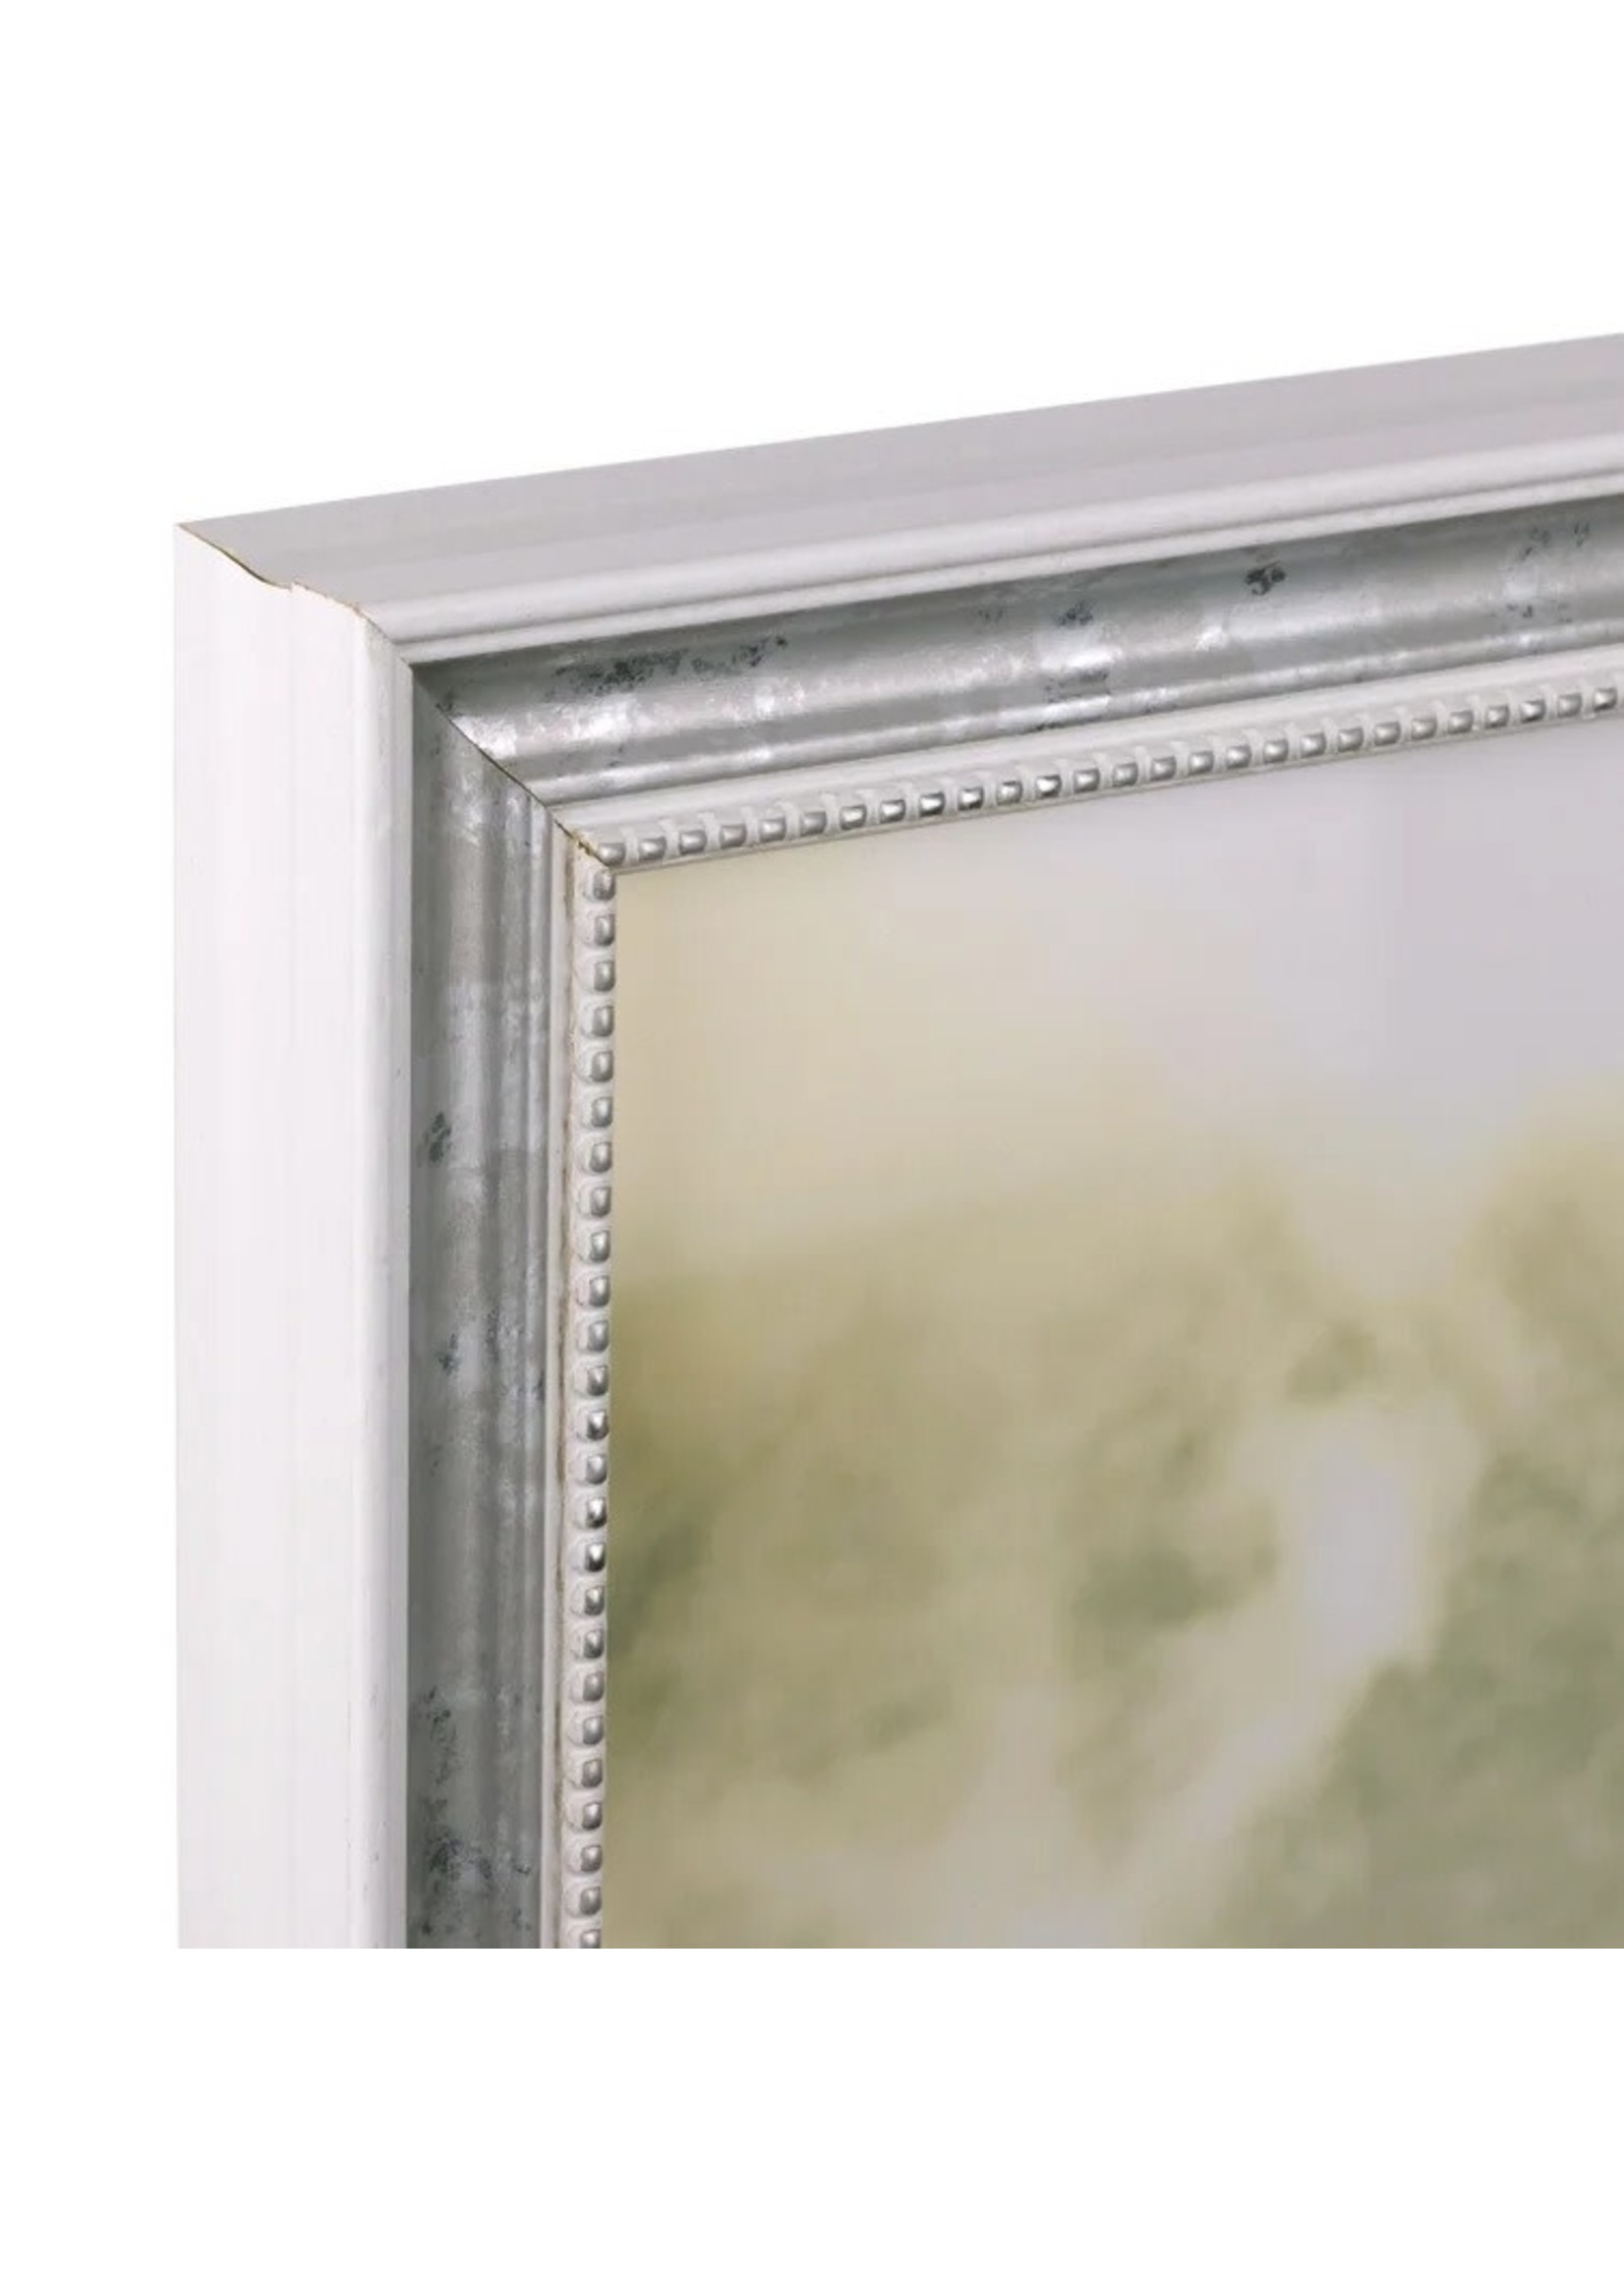 *5" x 7" Stratton Picture Frame - 0.75" Wide With Glass Facing - Set of 2 - Antique White